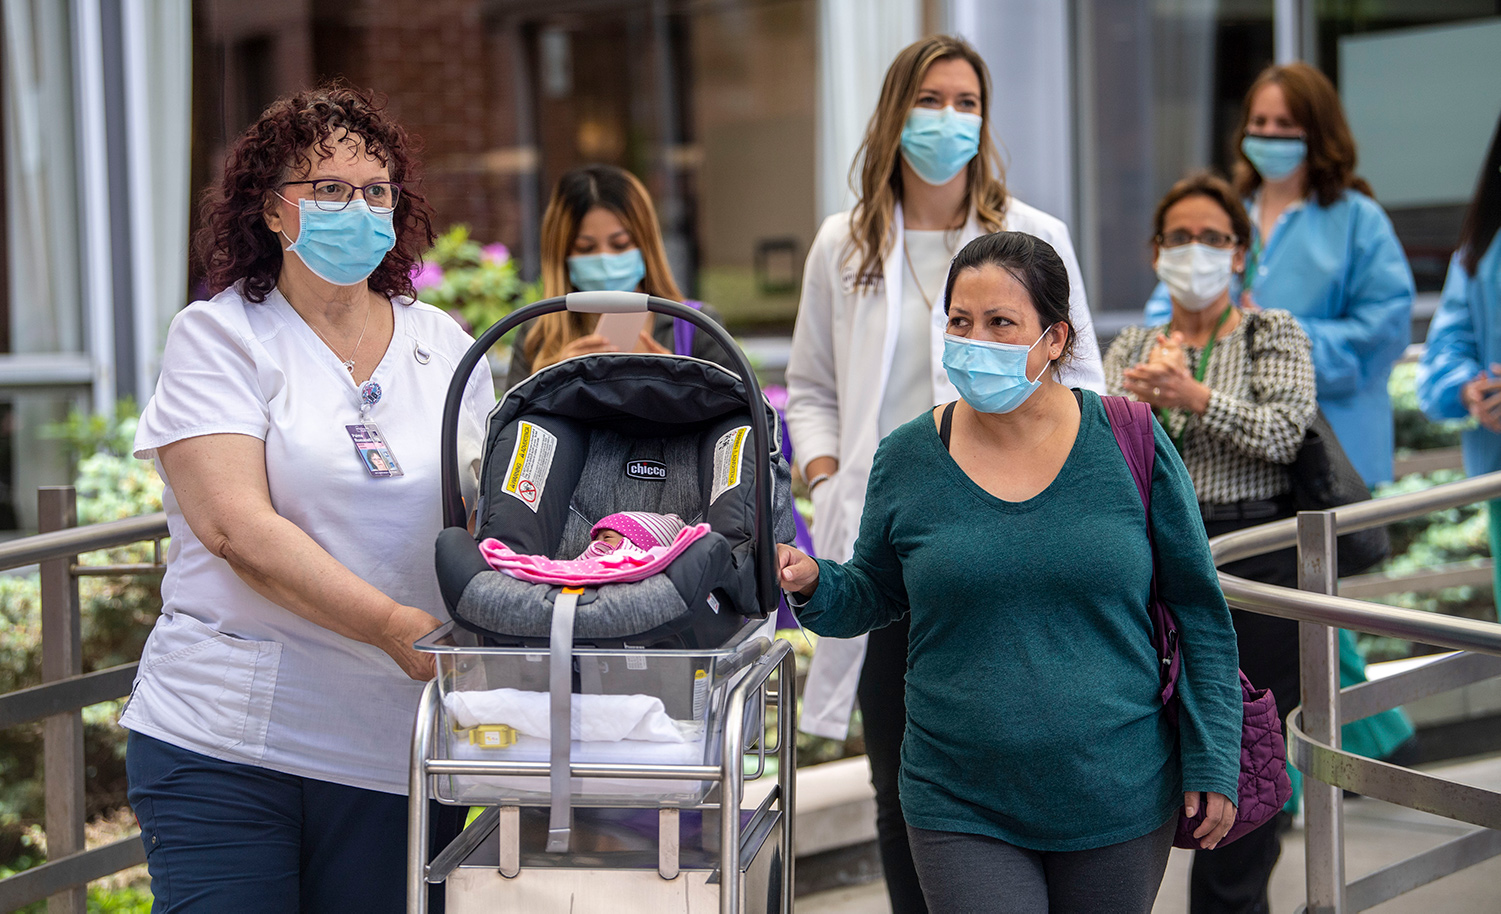 Adriana Torres with her baby daughter Leah, who is being released from NYU Winthrop Hospital in Mineola, New York on May 27, 2020. Leah was born prematurely while Adriana was in a medically-induced coma due to COVID-19. Alejandra Villa Loarca/Newsday RM via Getty Images.
